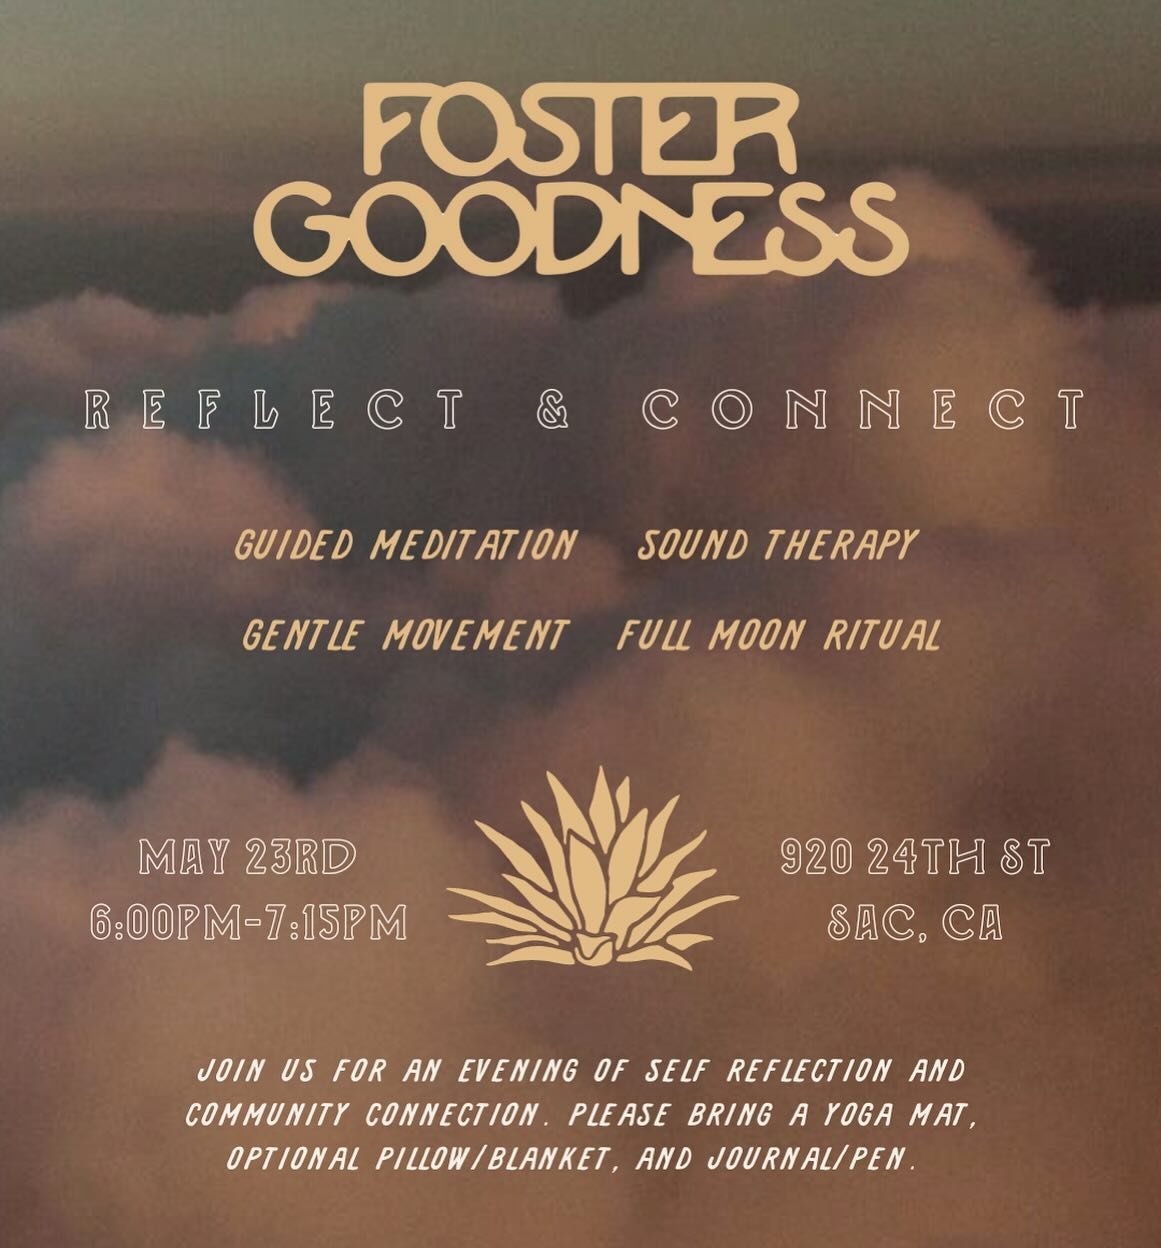 Would love to have ya at May&rsquo;s gathering of Reflect &amp; Connect✨ 

Join us as we get together as a community to support each other under the full moon. You can anticipate an intentional evening of guided movement, meditation, journaling and s